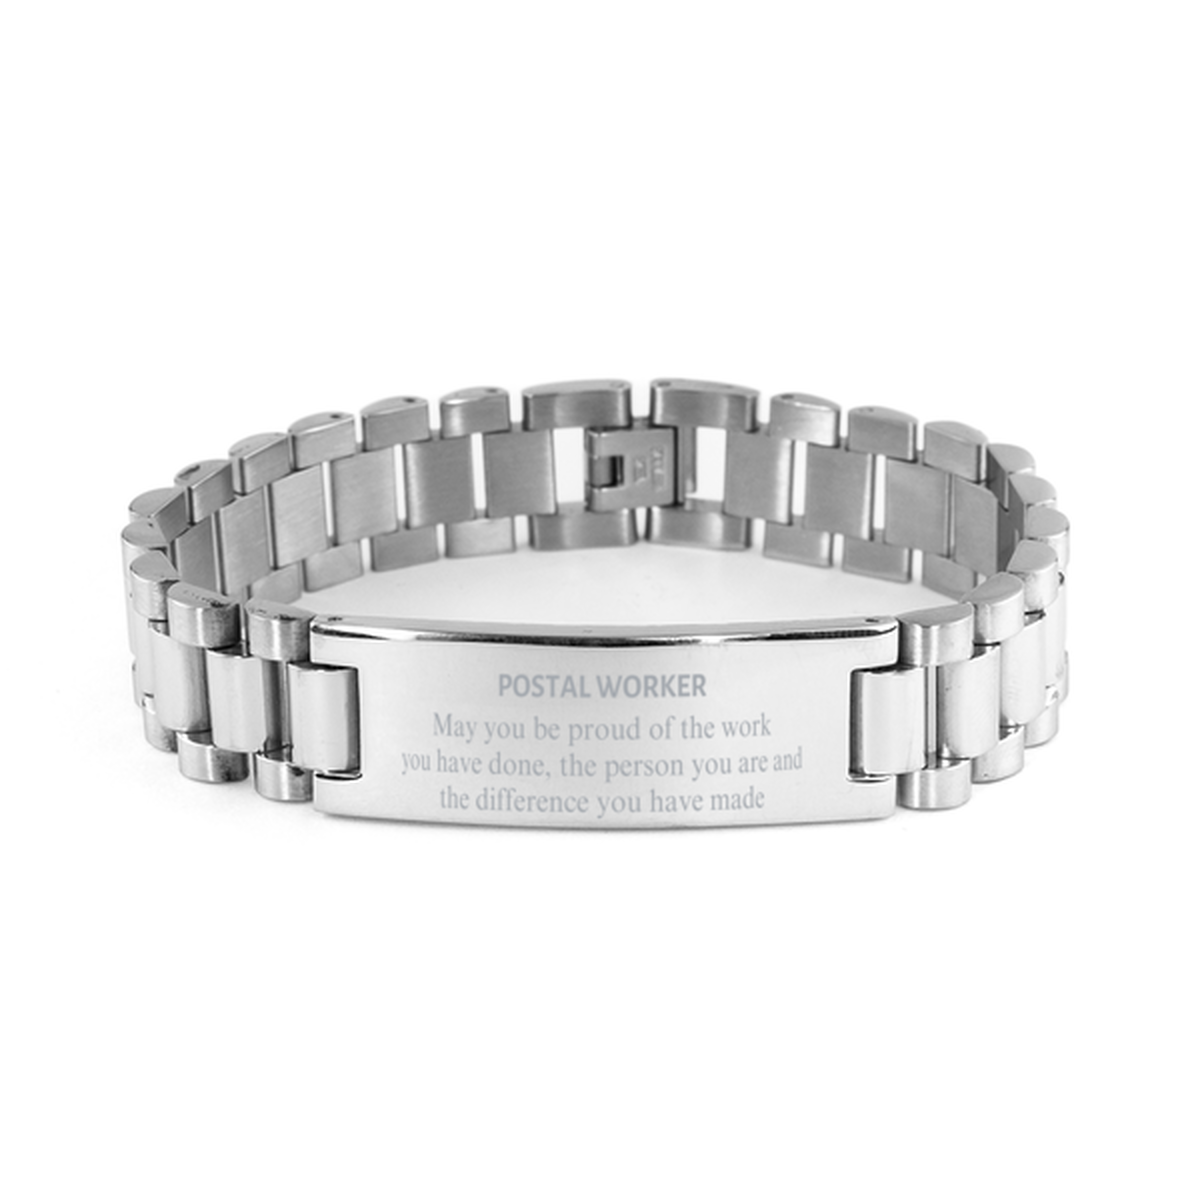 Postal Worker May you be proud of the work you have done, Retirement Postal Worker Ladder Stainless Steel Bracelet for Colleague Appreciation Gifts Amazing for Postal Worker